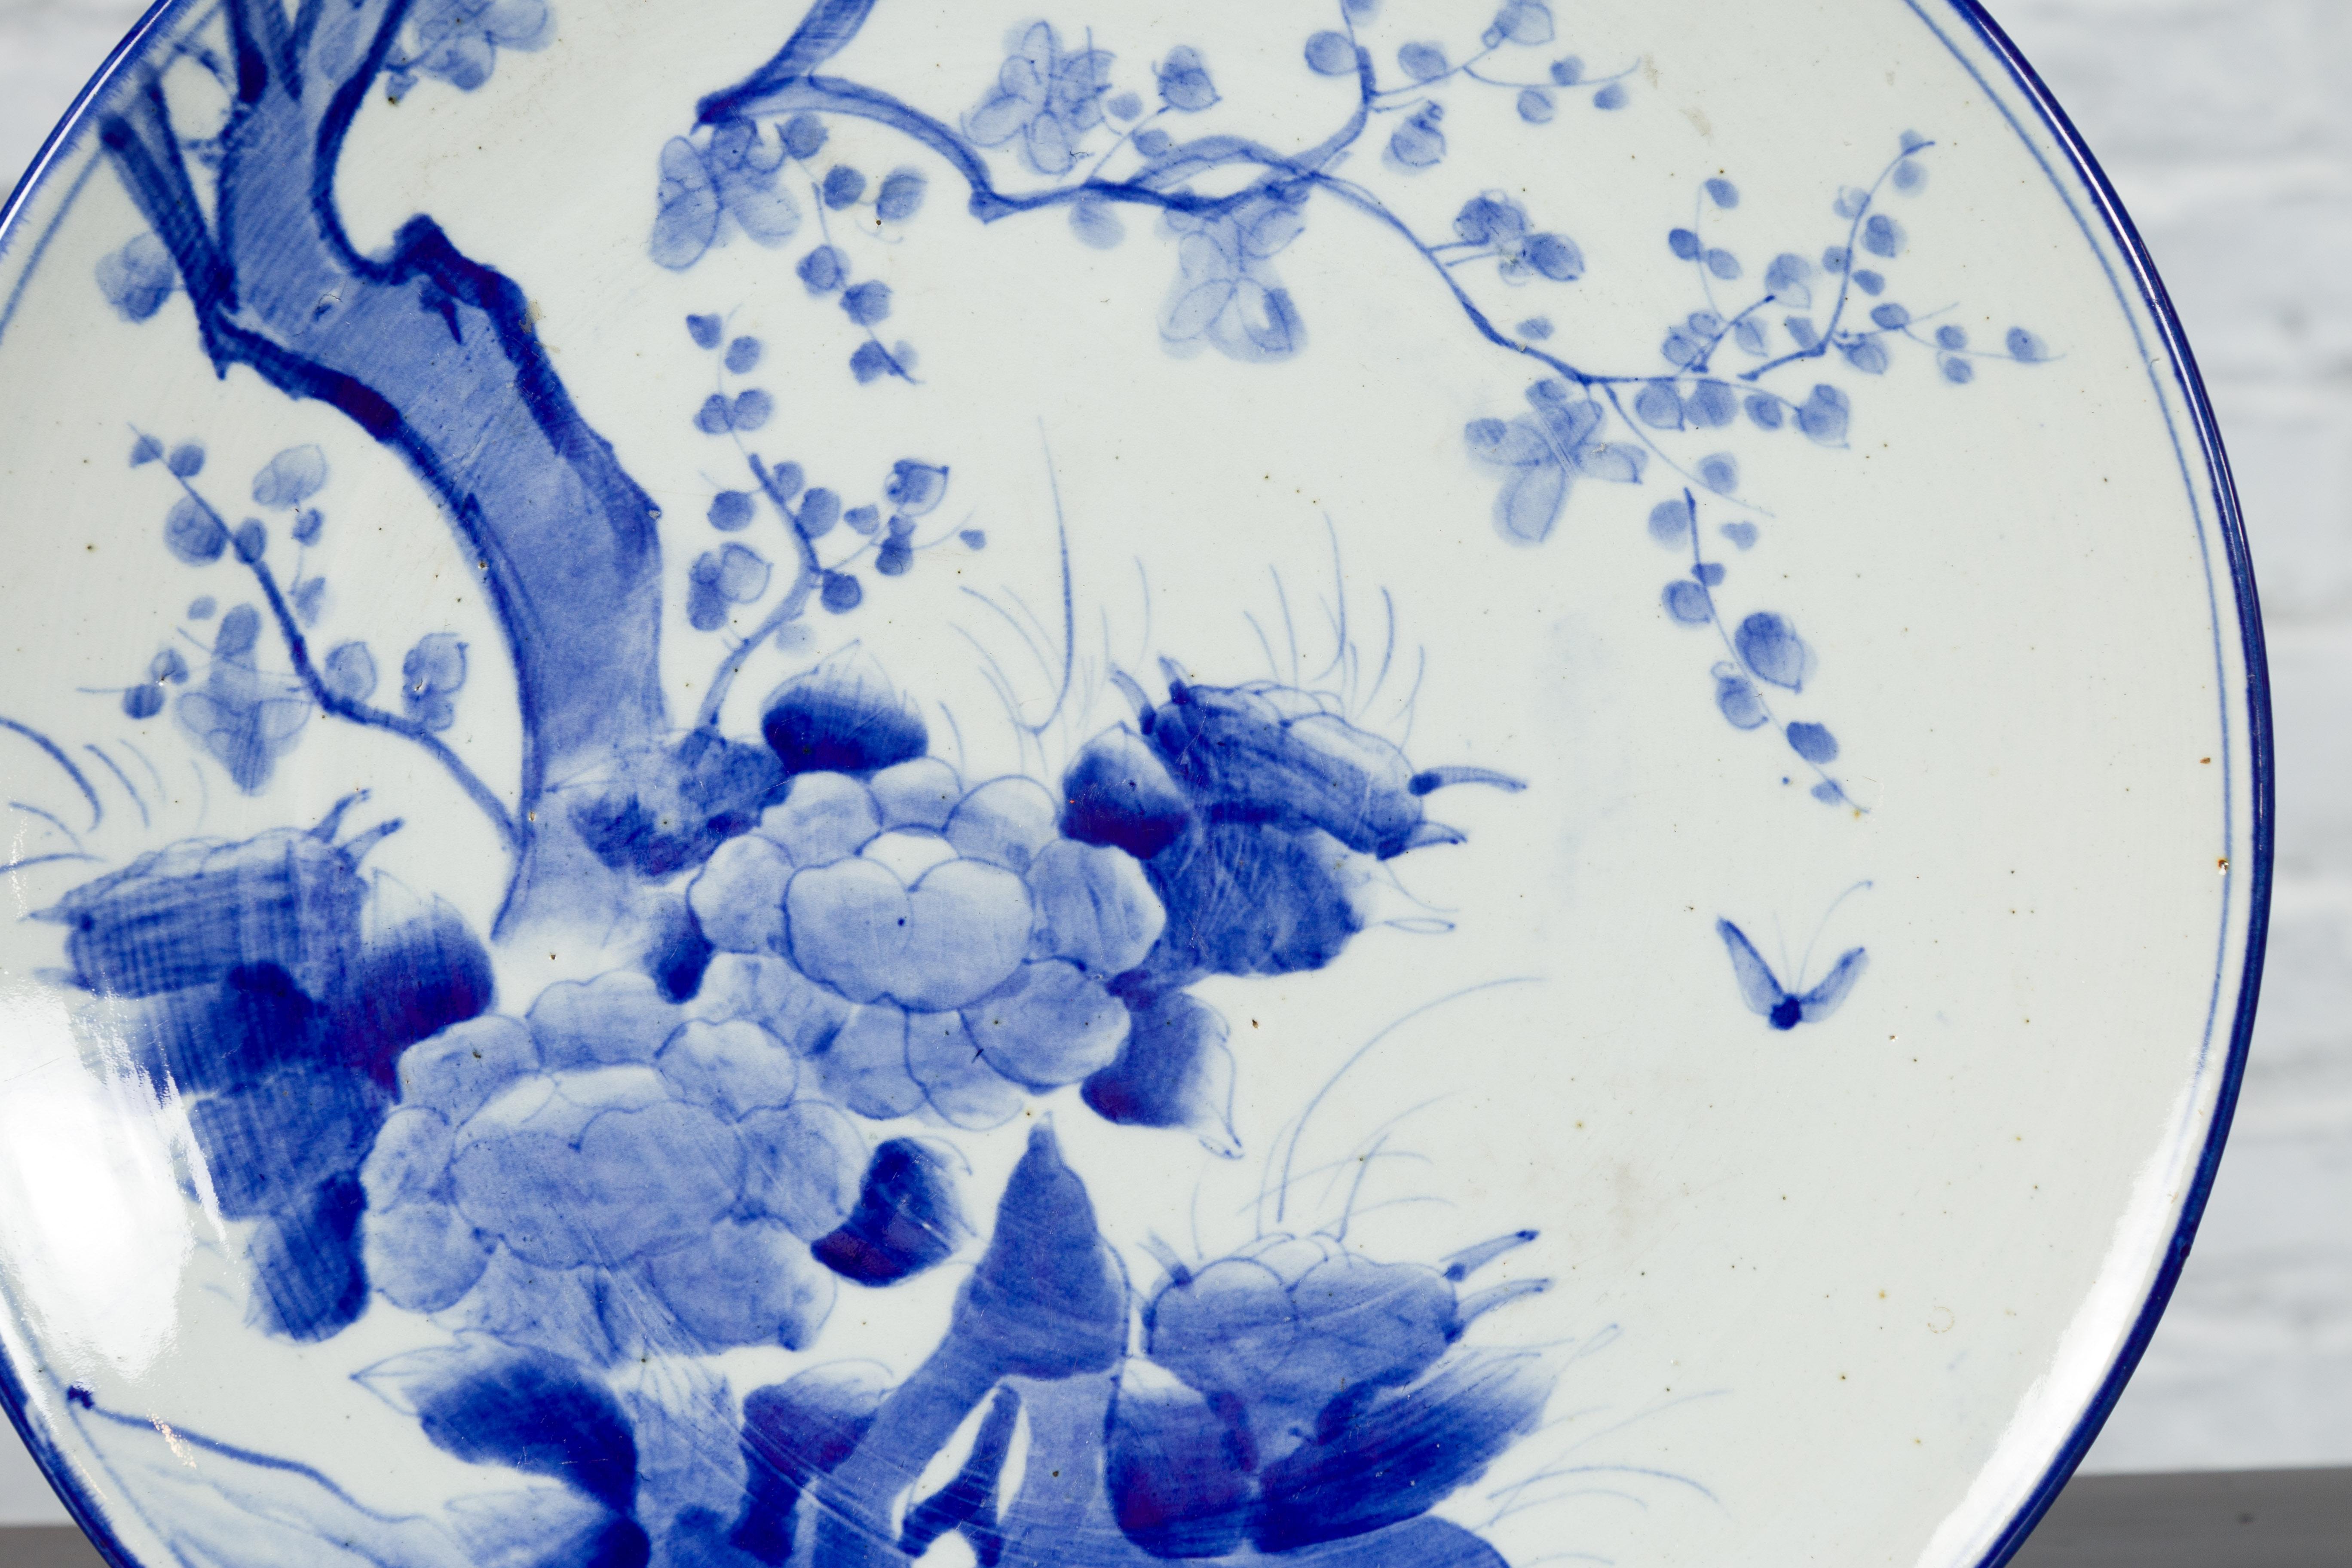 19th Century Japanese Porcelain Plate with Hand-Painted Blue and White Décor For Sale 2